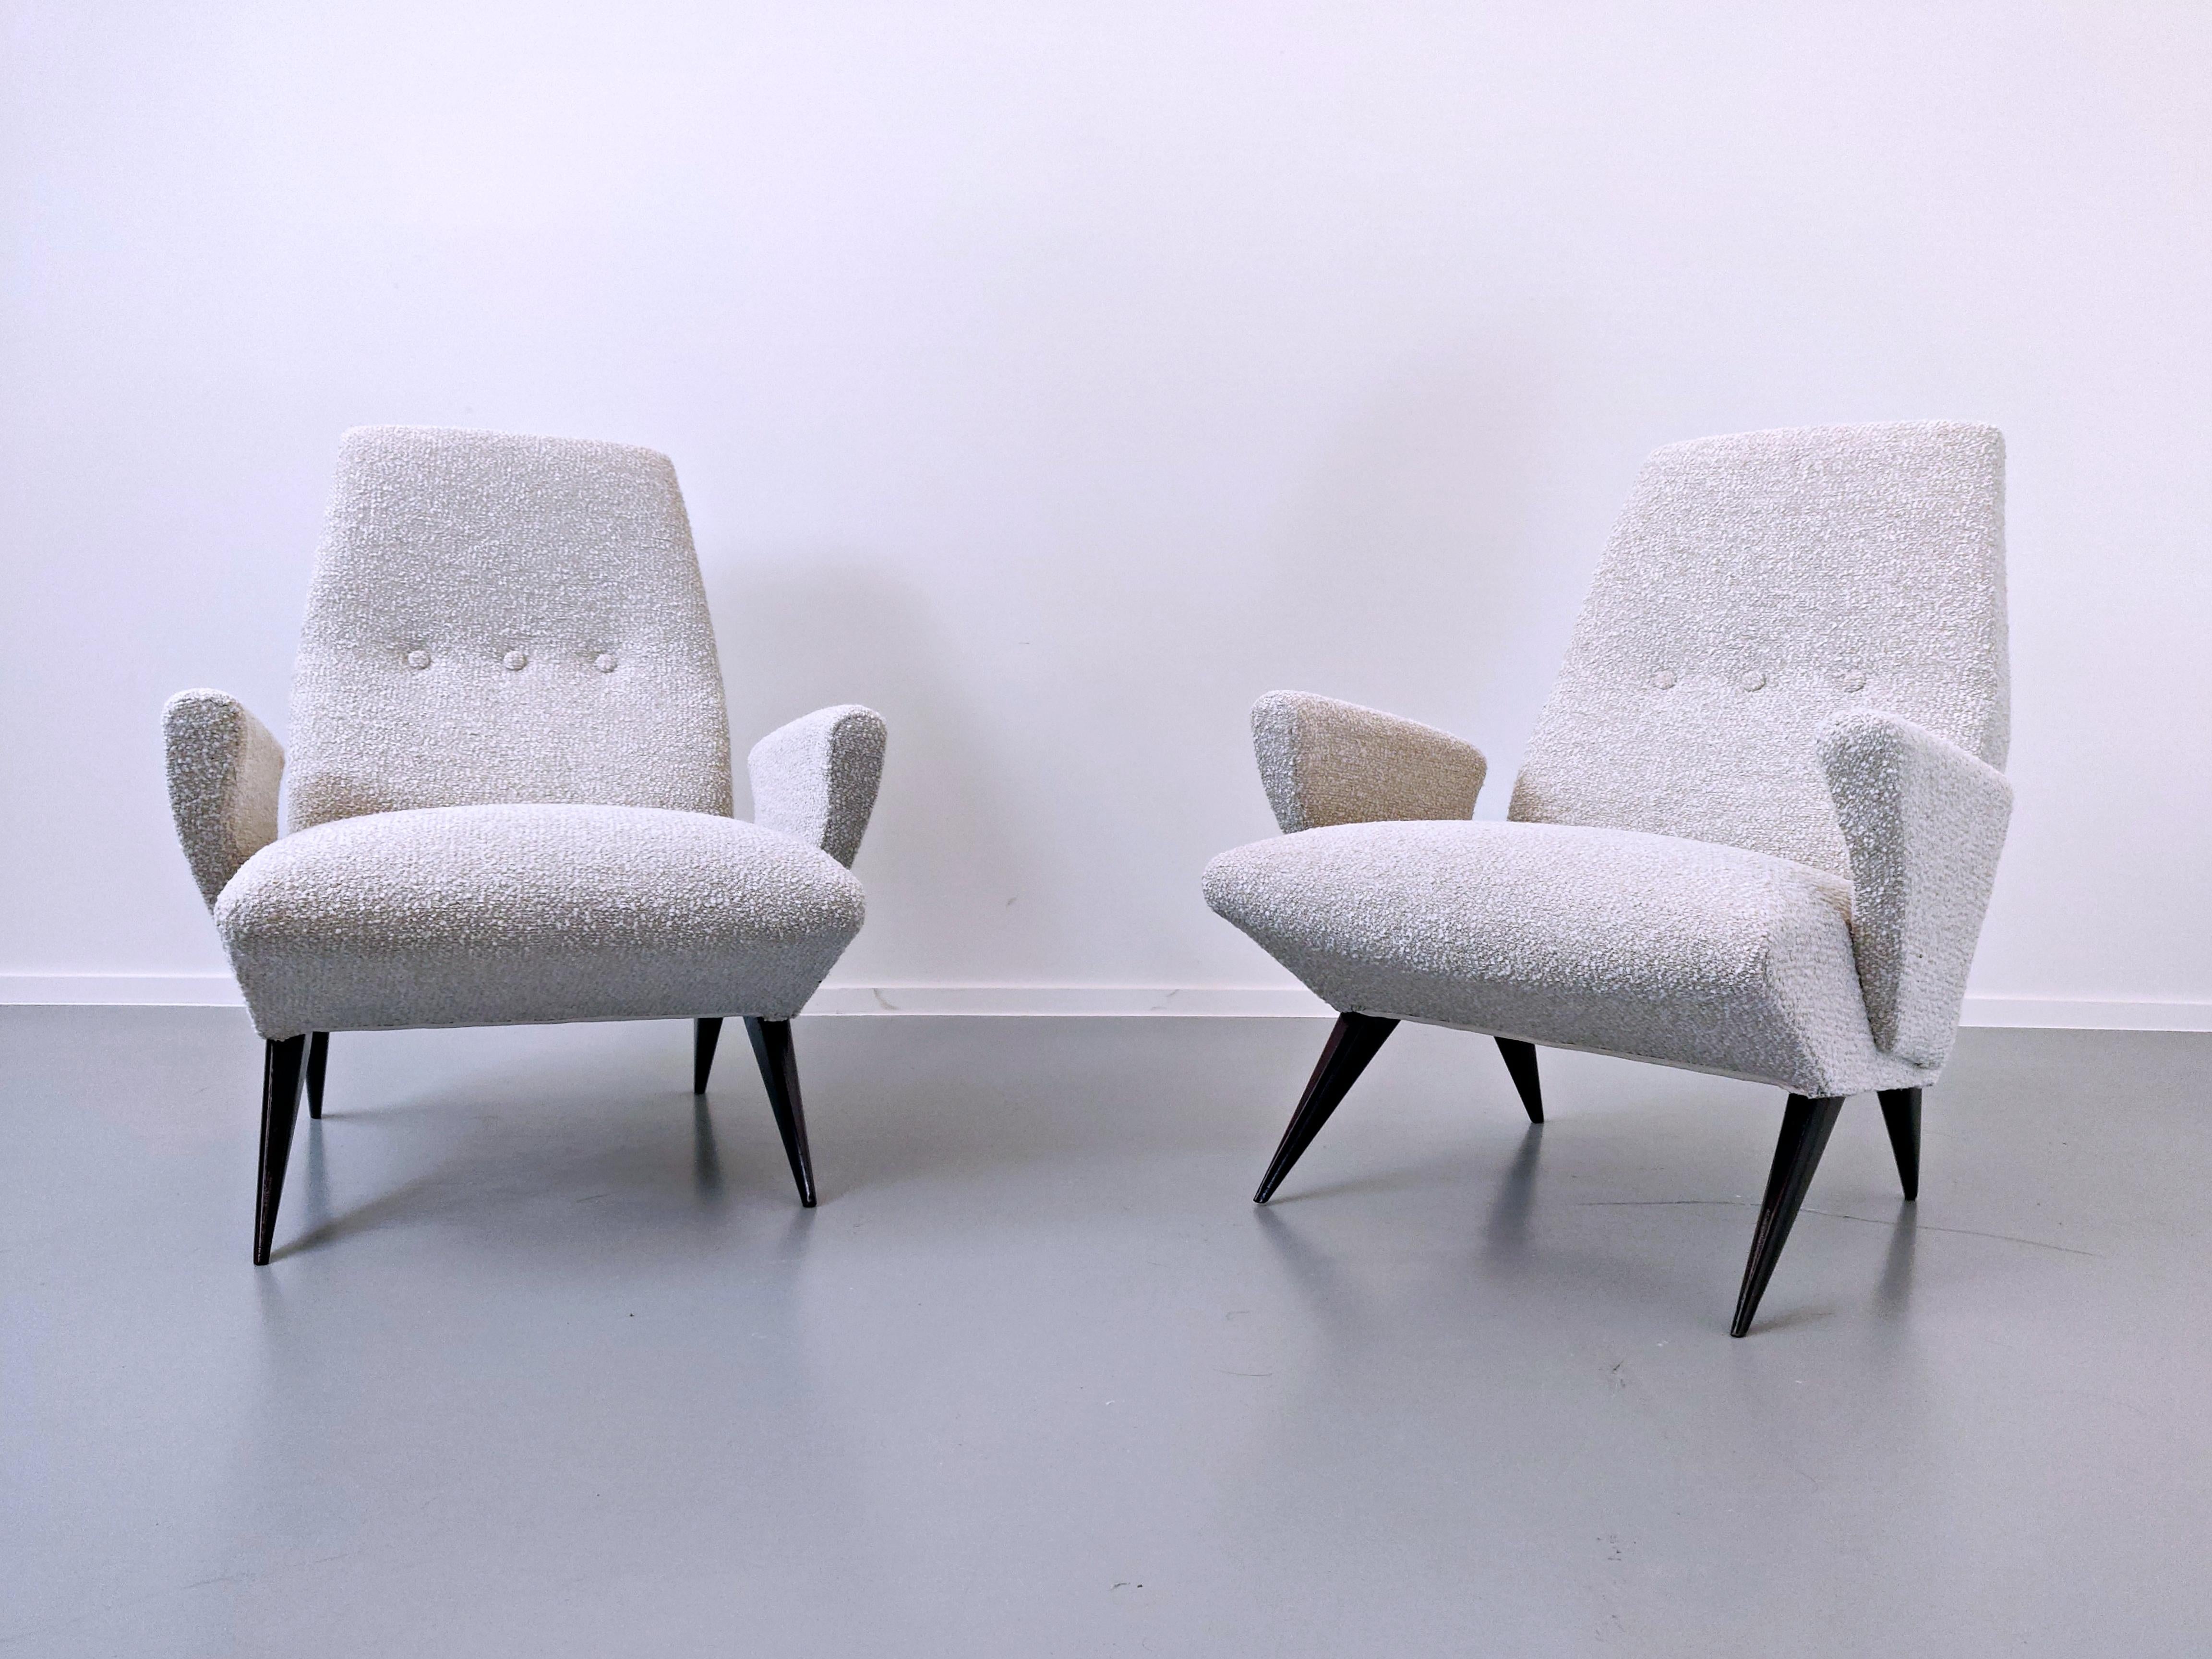 Italian Pair of Mid-Century Modern  Armchairs by Nino Zoncada for Frimar, Italy  For Sale